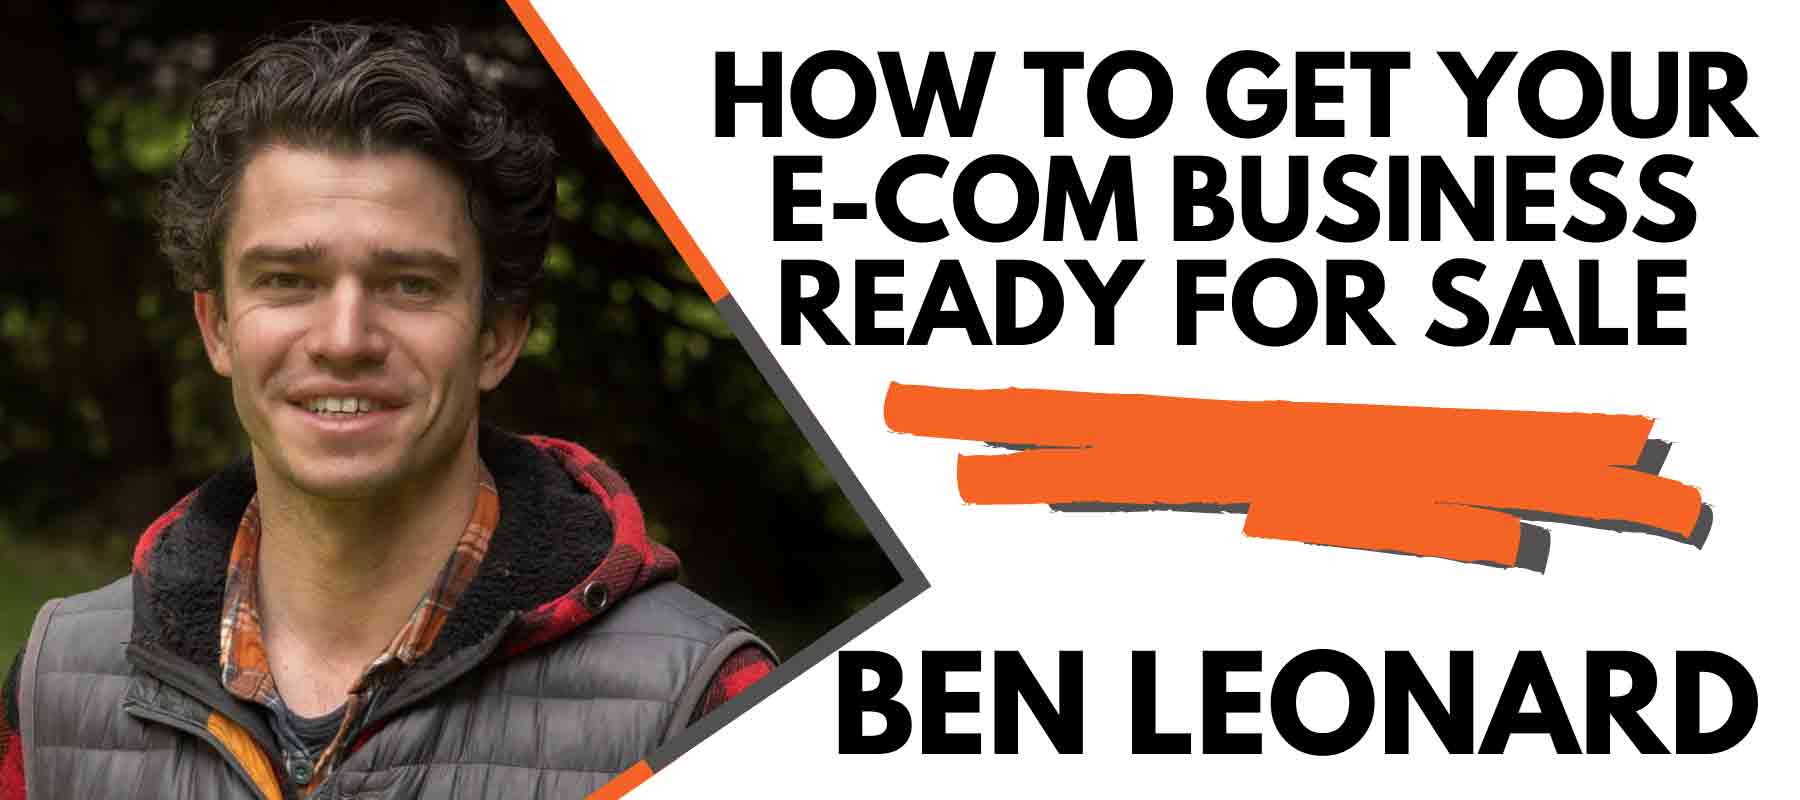 How To Get Your E-commerce Business Ready for Sale